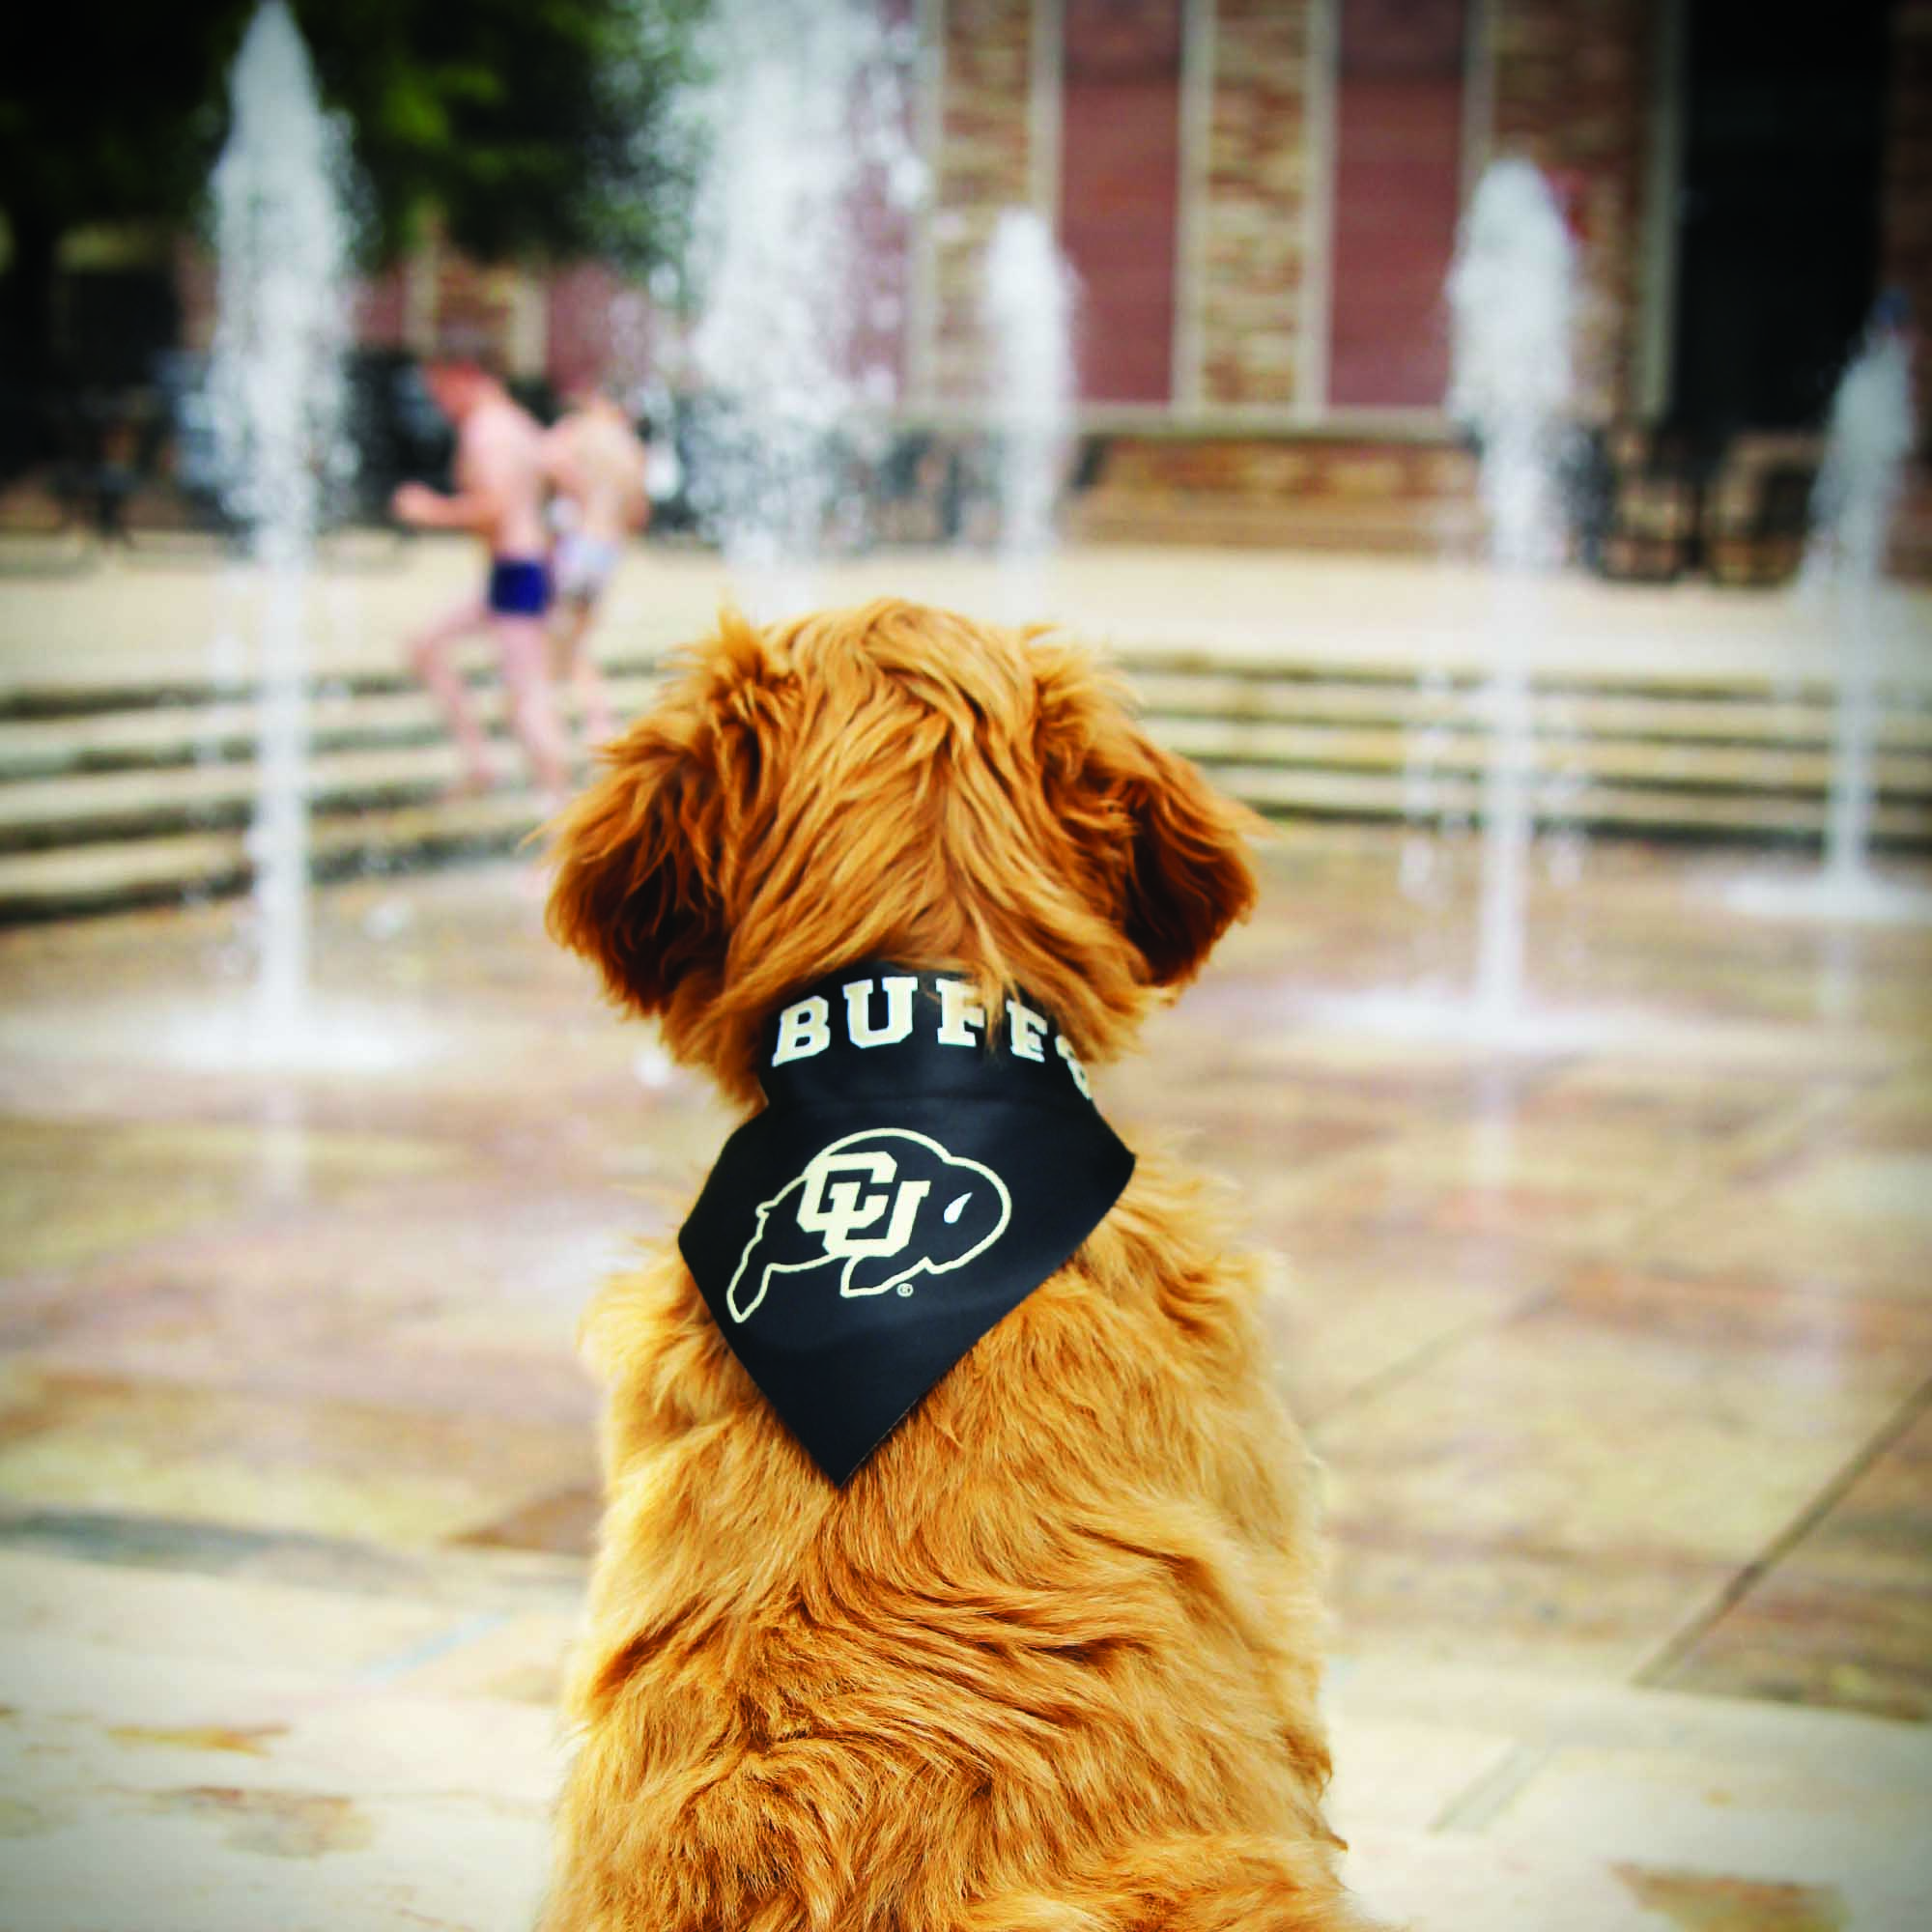 Puppy with Buffs  bandana at the UMC fountains